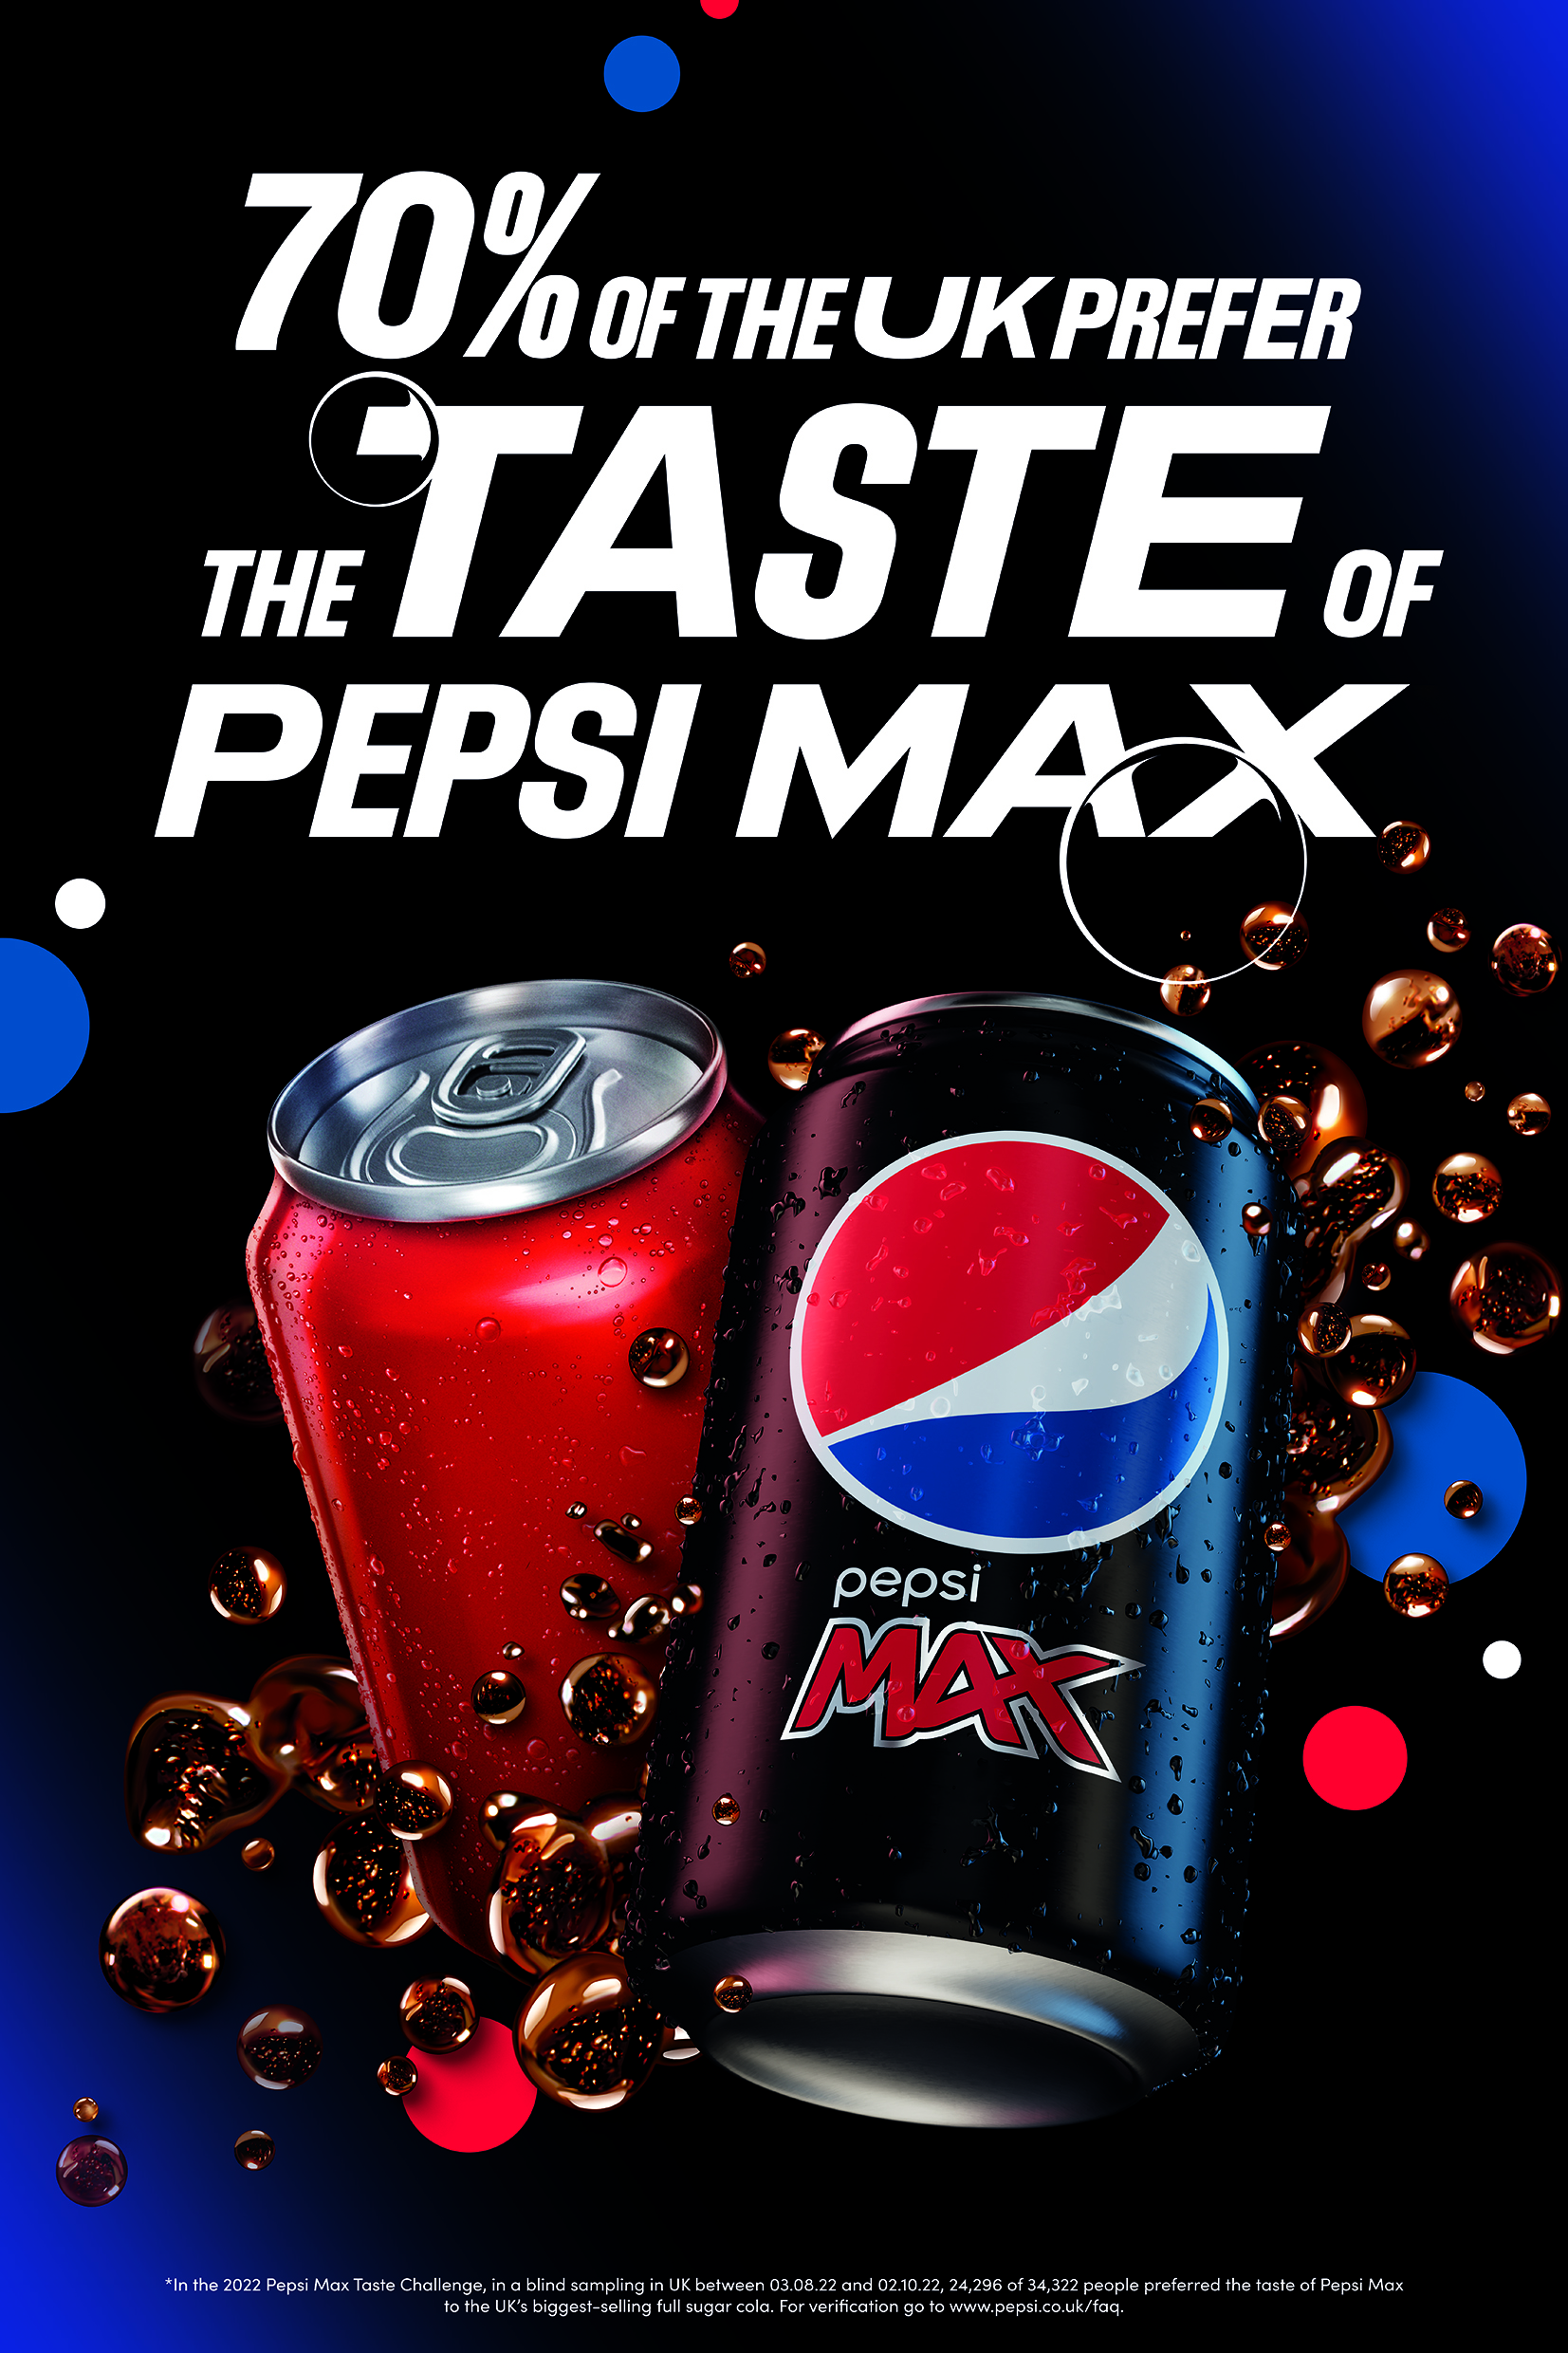 It’s official: seven out of ten Brits prefer Pepsi Max